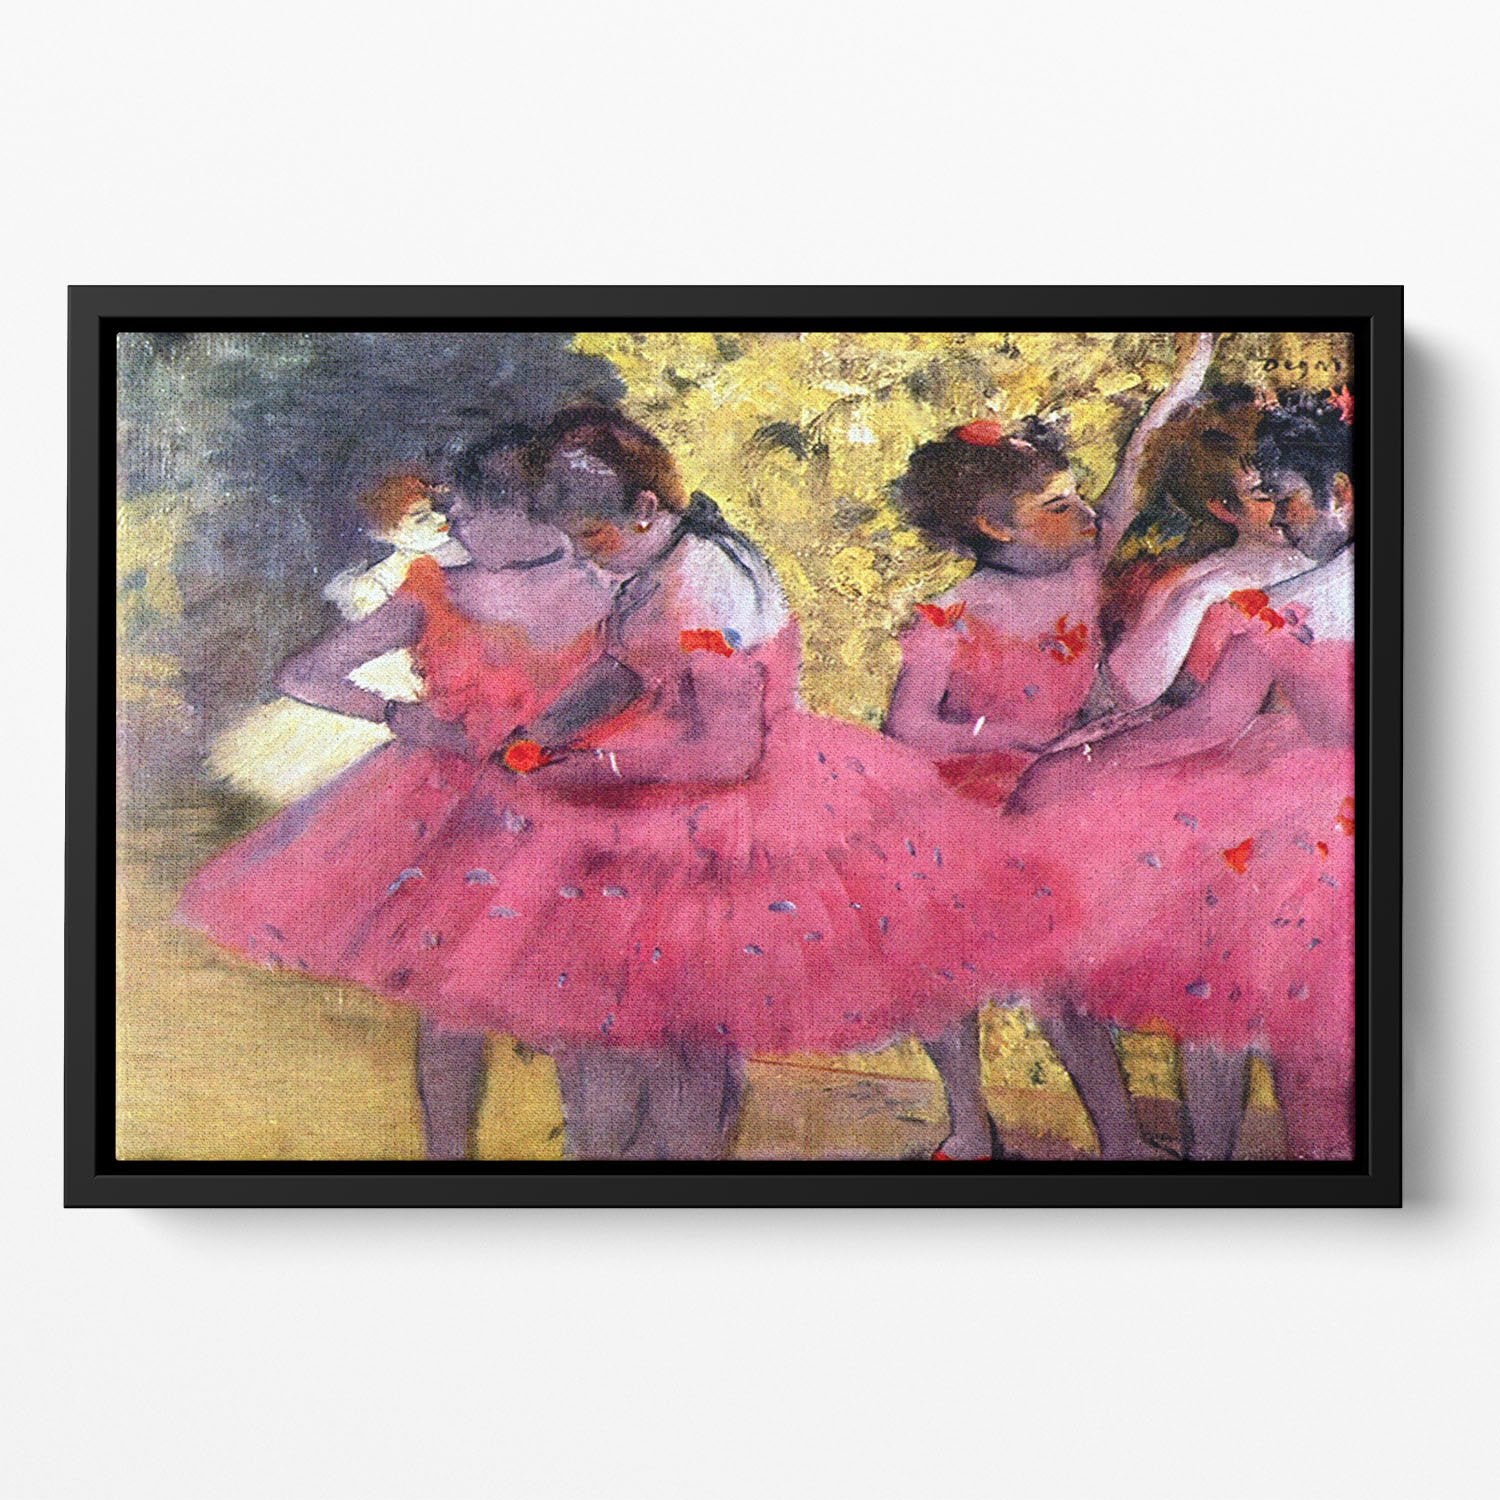 Dancers in pink between the scenes by Degas Floating Framed Canvas